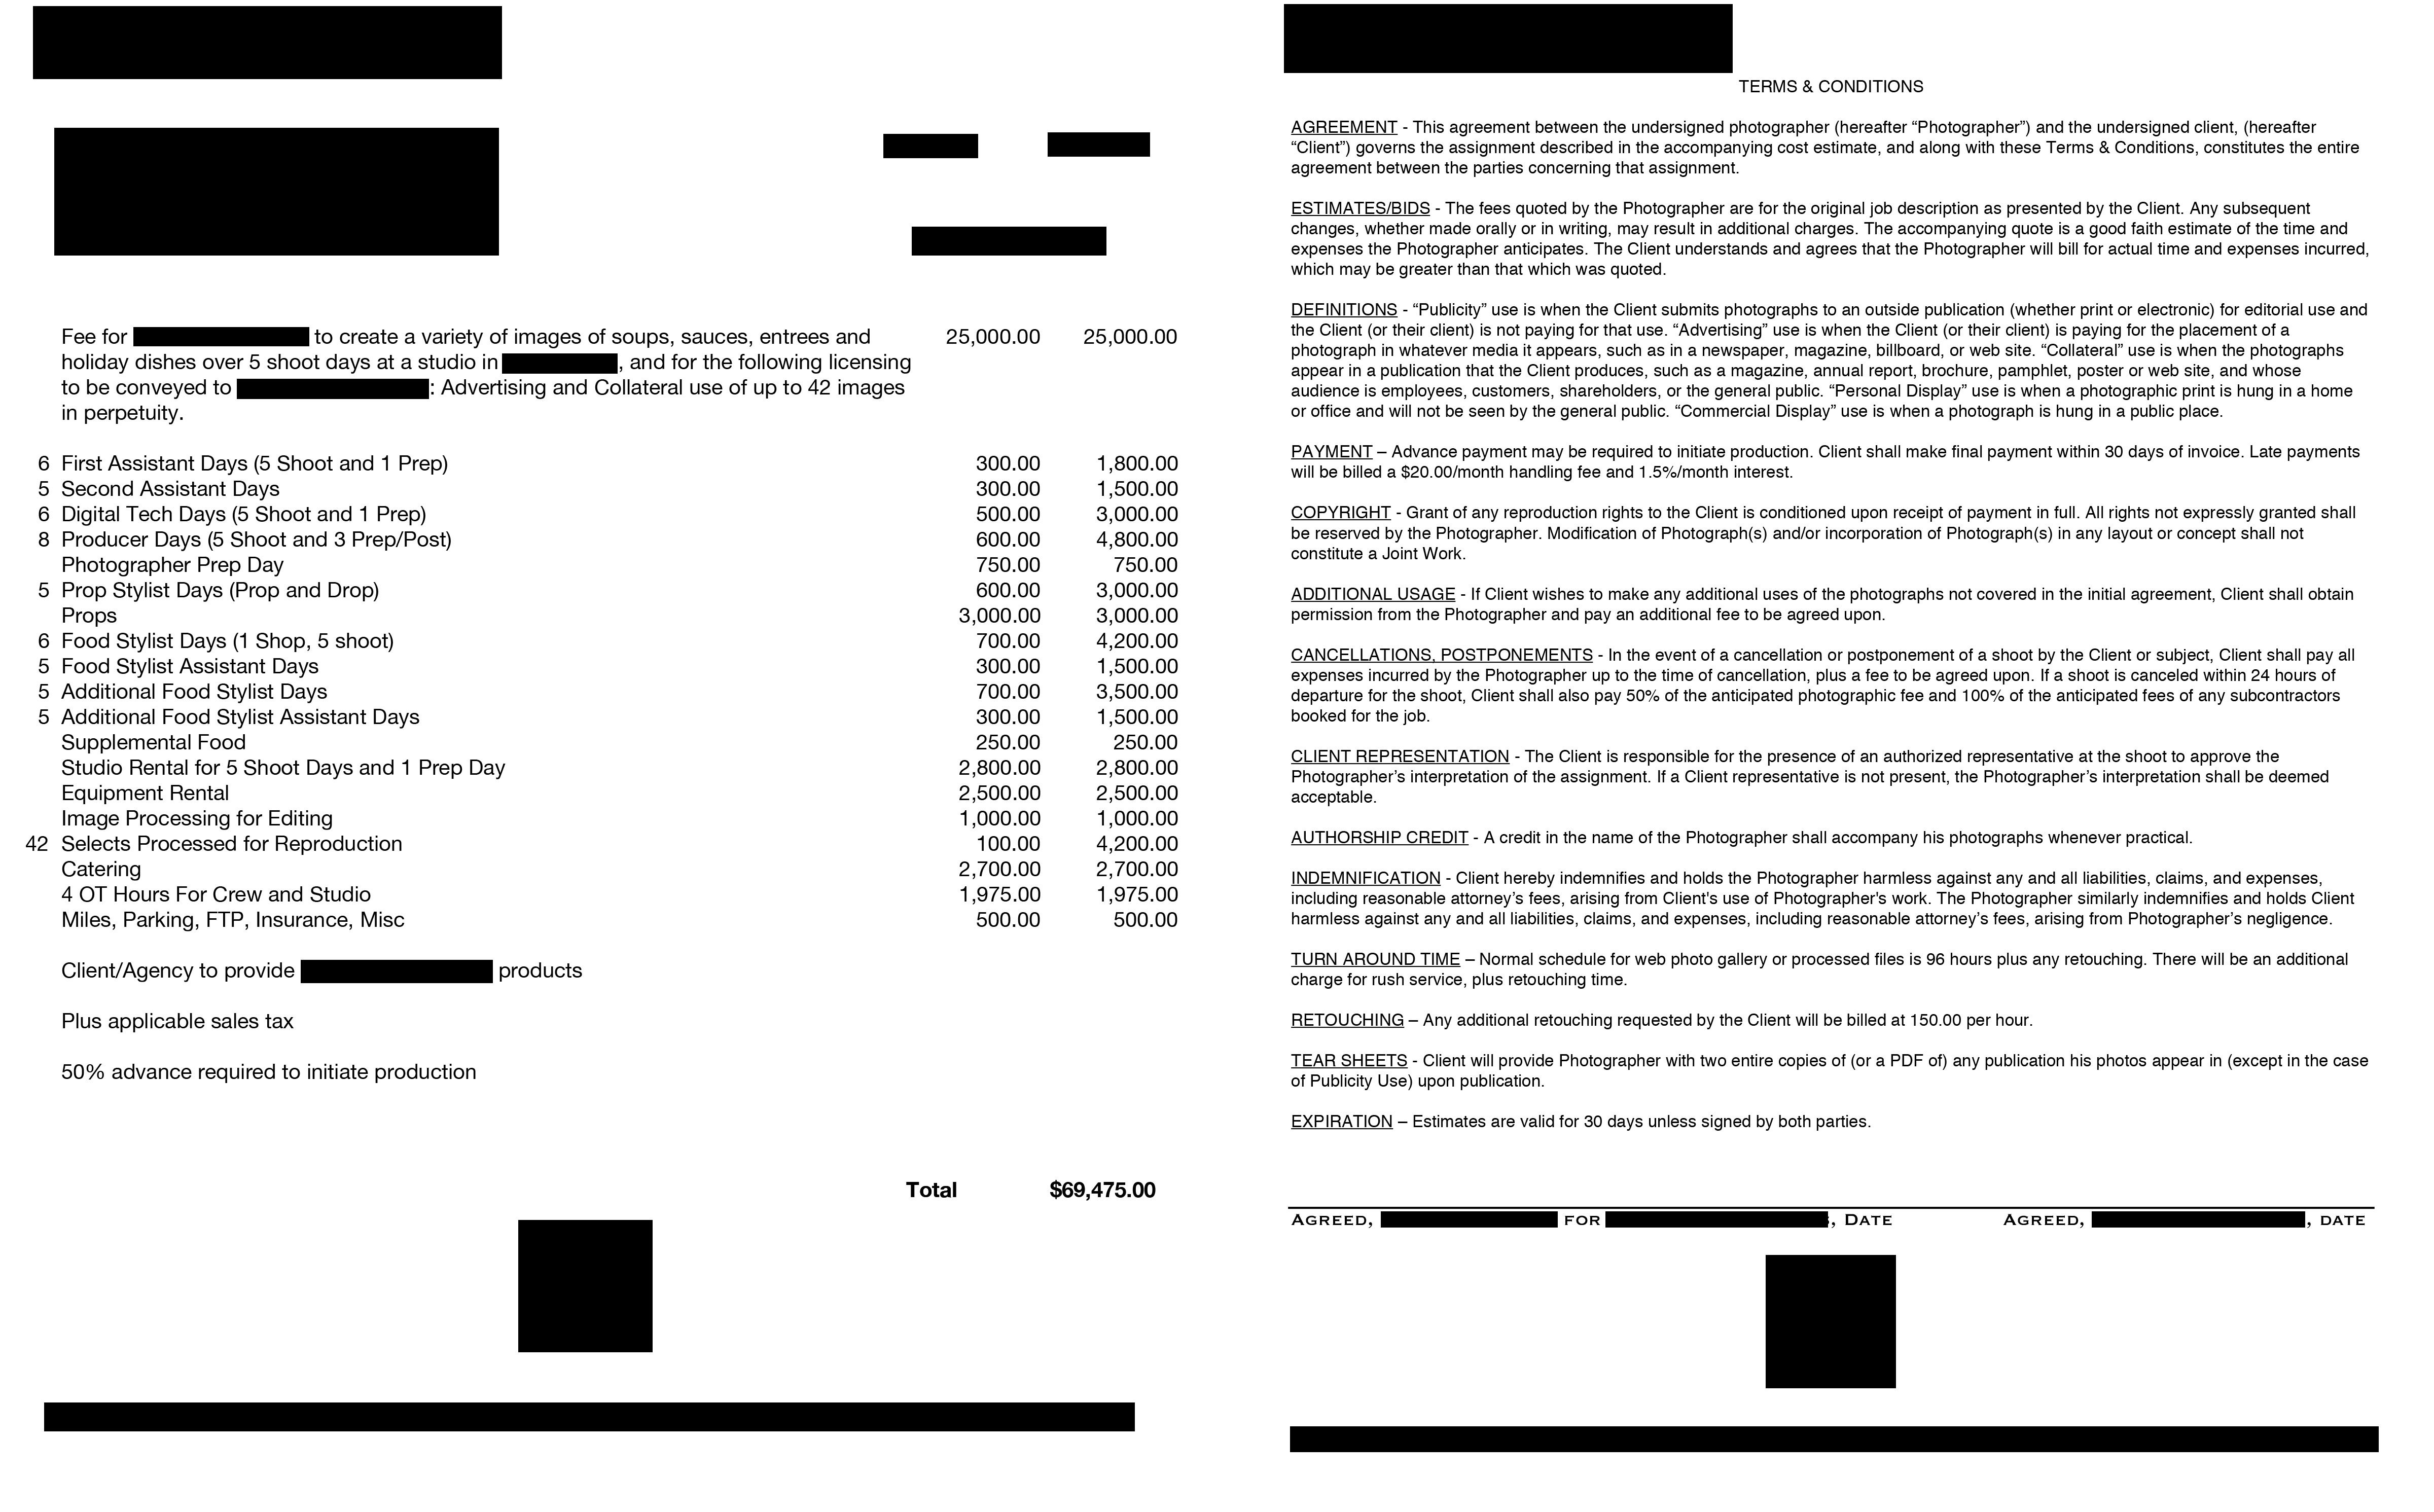 Pricing & Negotiating with Estimate Terms Redacted